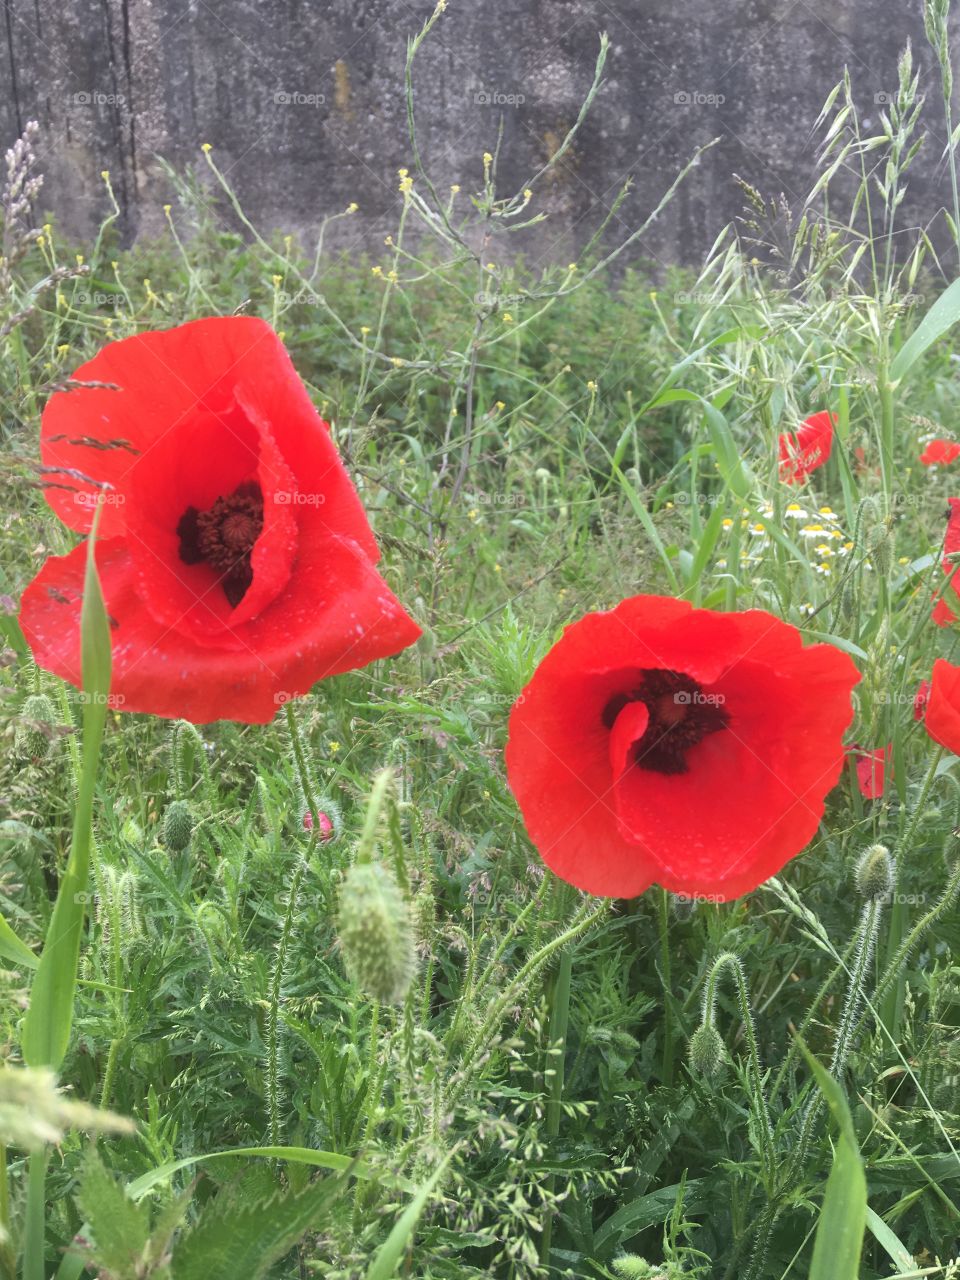 Poppies in the wild